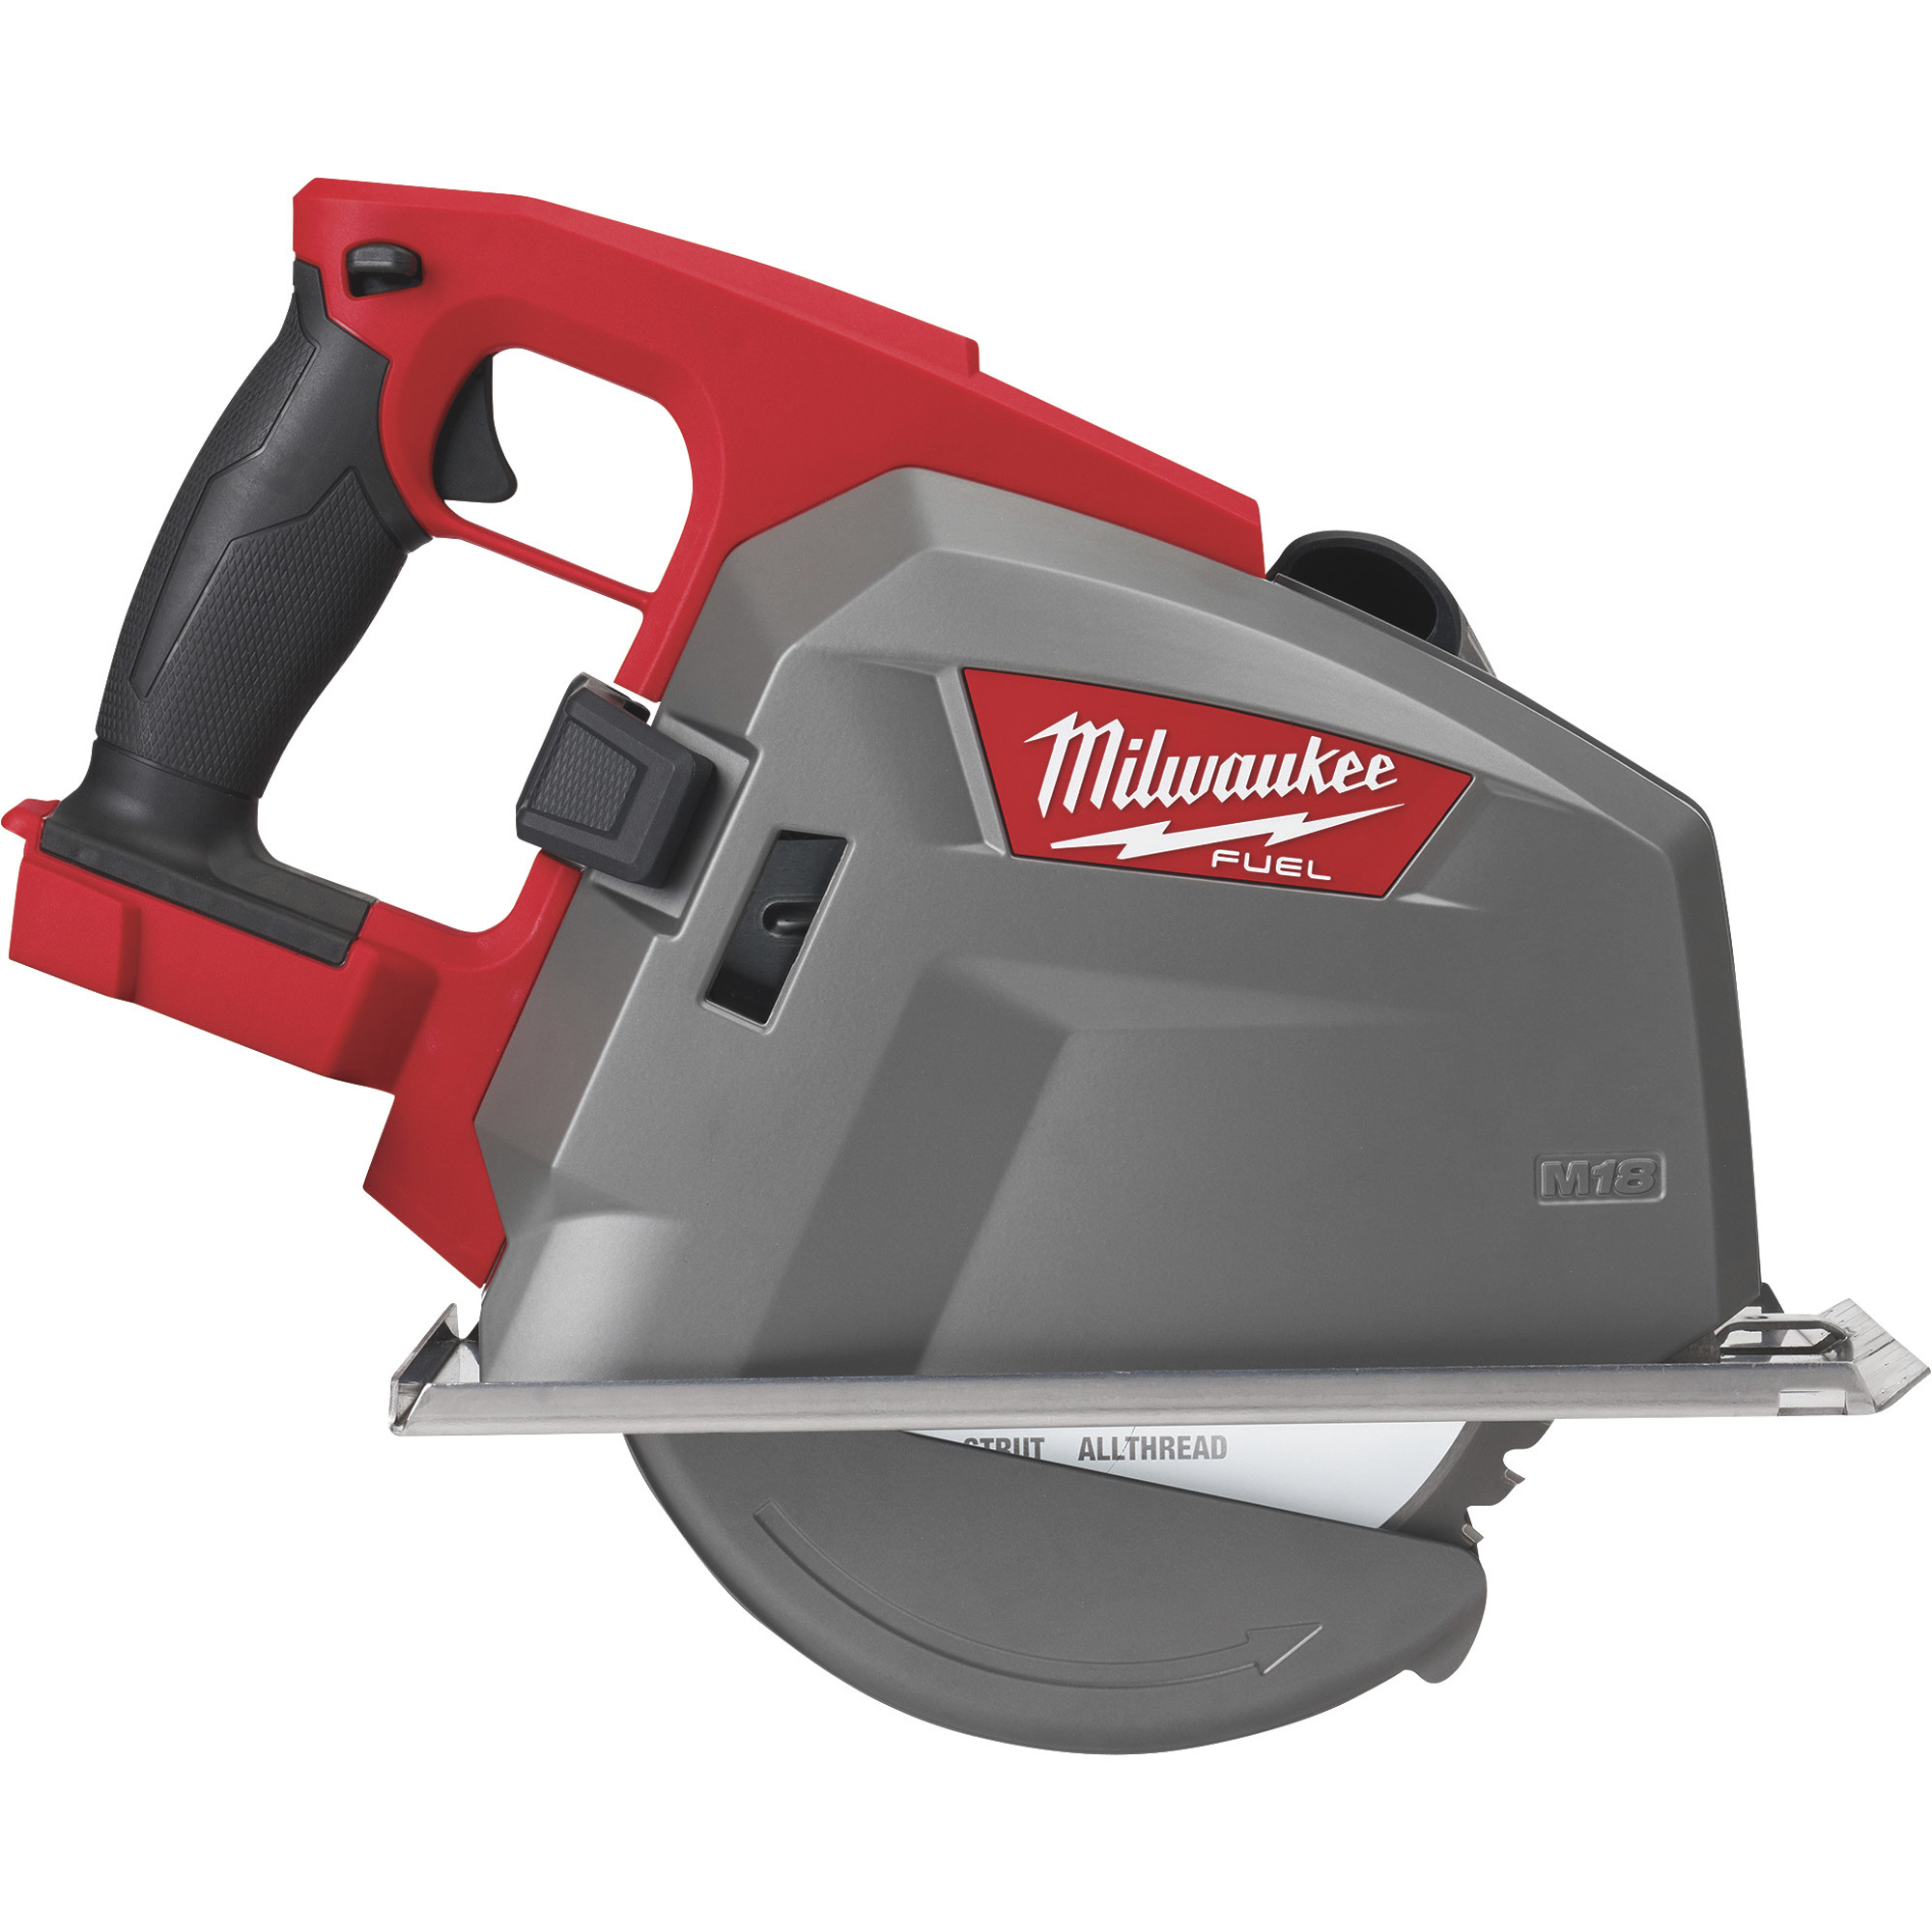 Milwaukee M18 FUEL Cordless Brushless Metal Cutting Circular Saw, Tool Only, 8Inch, Model 2982-20